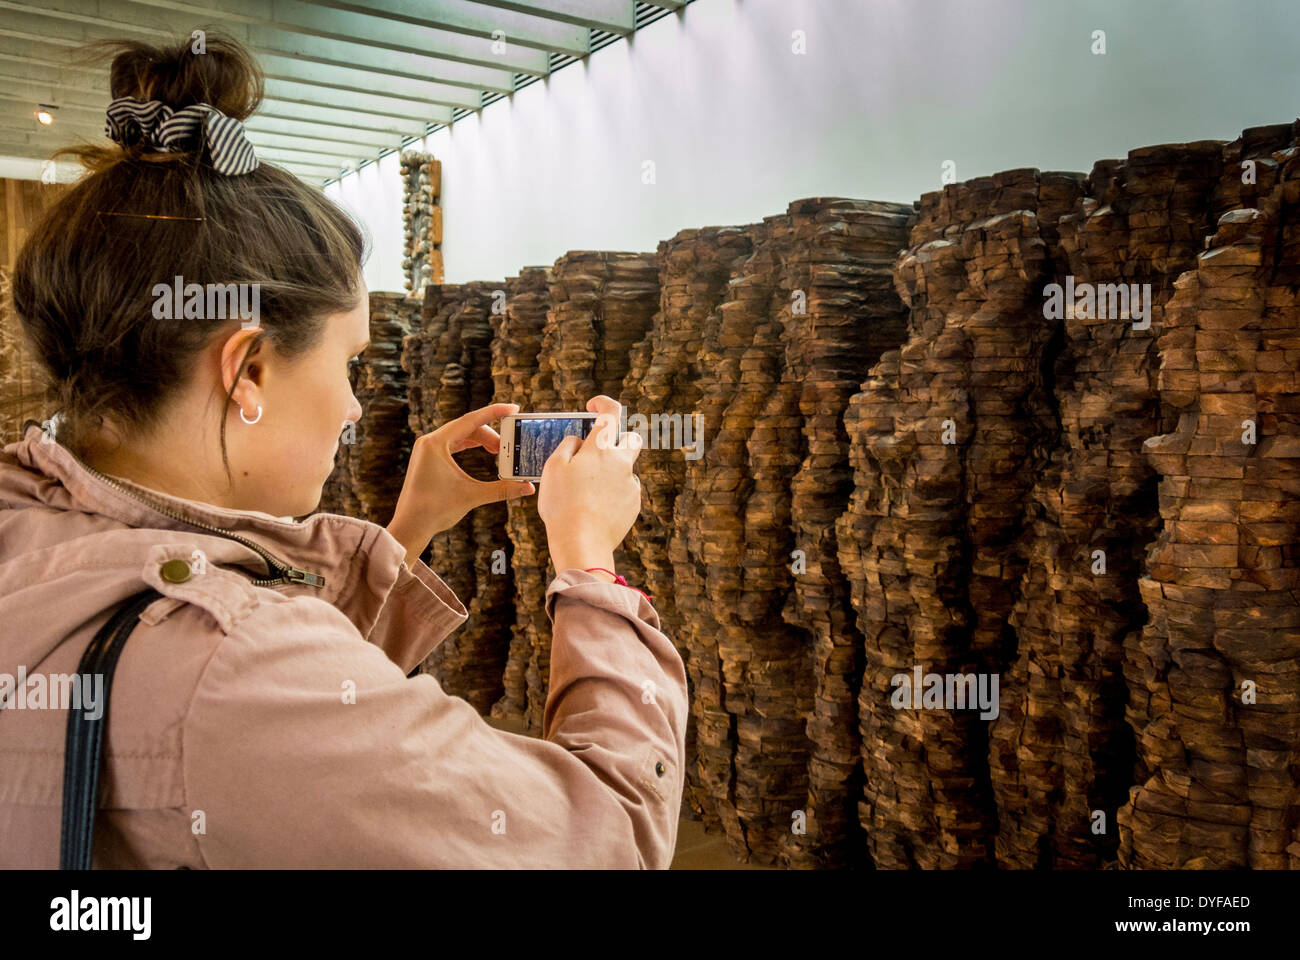 Girl taking photo on iphone of Sculpture by Ursula von Rydingsvard at Yorkshire Sculpture Park, UK. Stock Photo